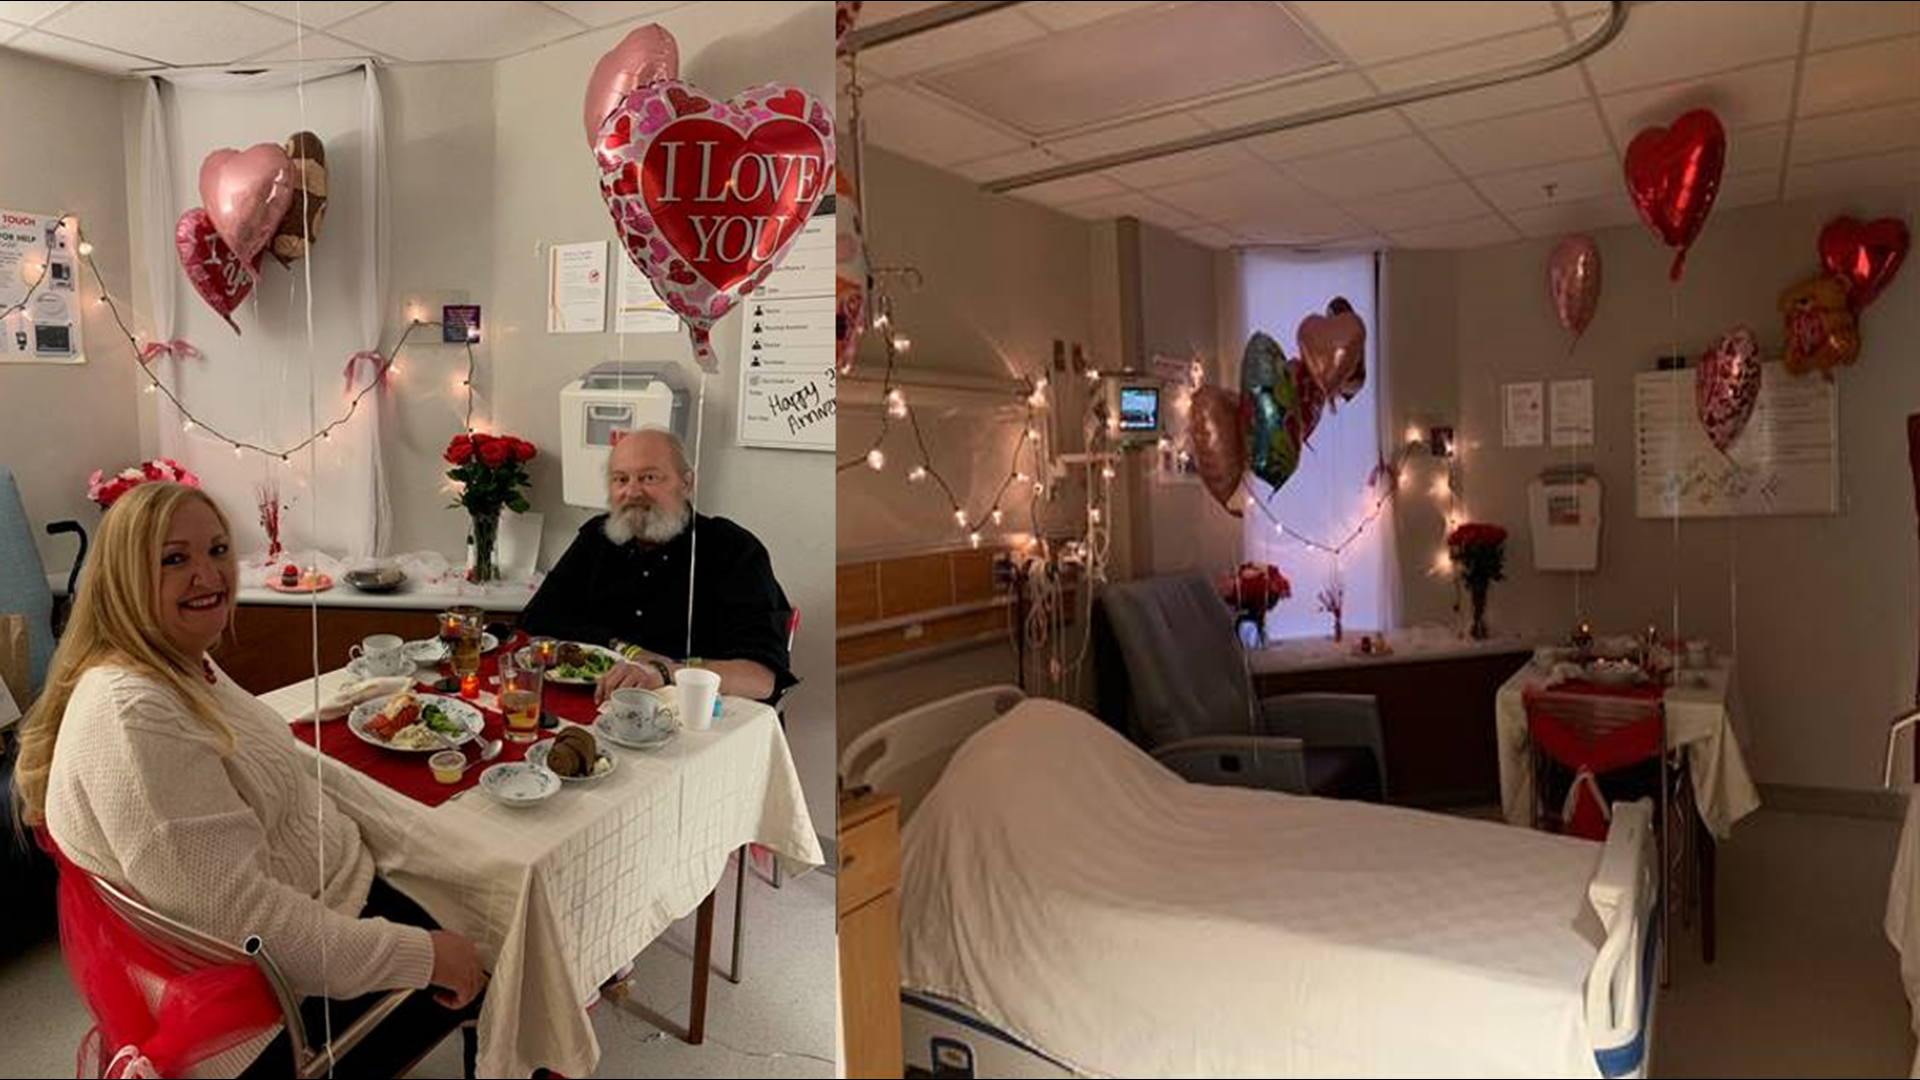 Cardiology nurses at Wake Forest Baptist Medical Center surprised patient, Joseph Miller and his wife Becky with a Valentine’s Day dinner. The couple is have to celebrate their 35th wedding anniversary at the hospital.